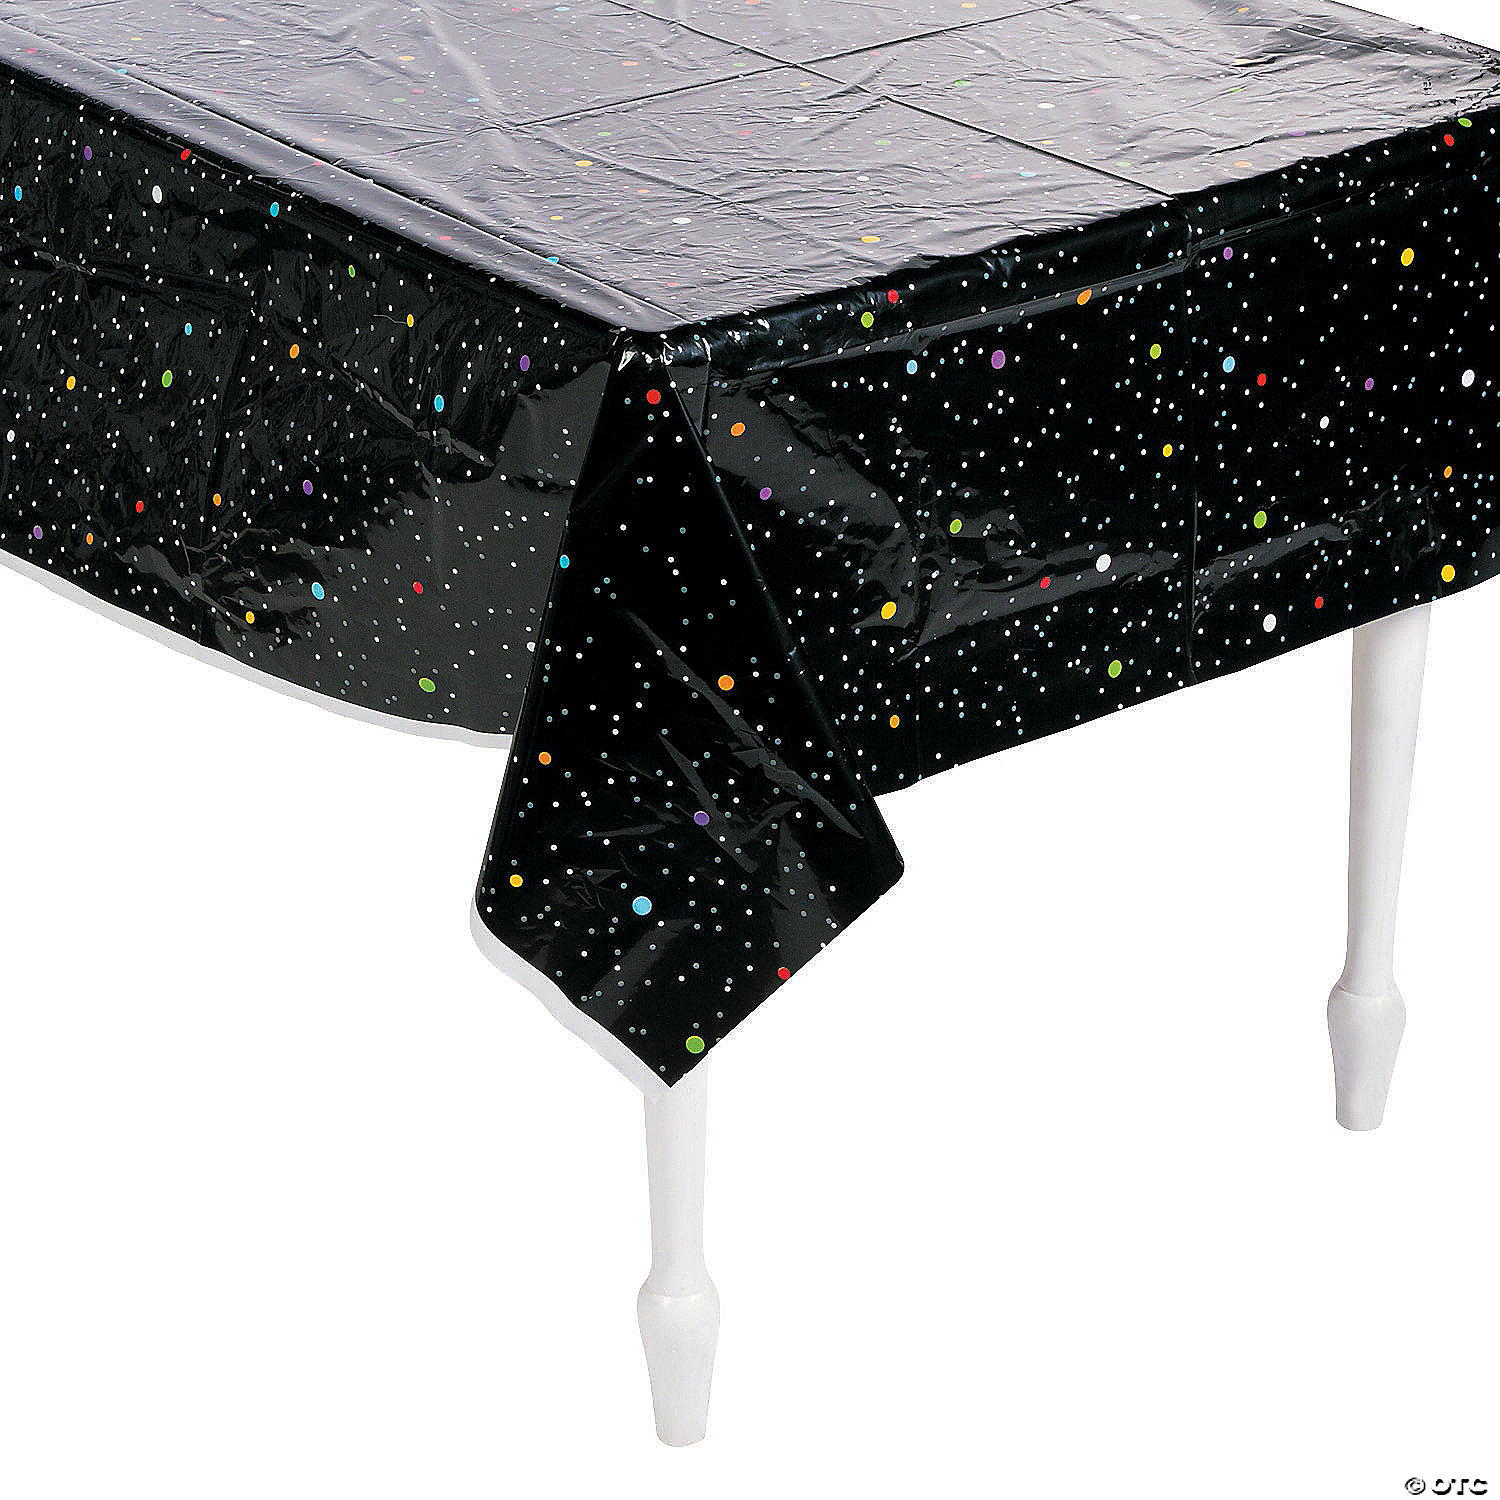 Space Tablecloth Starry Night Tablecloth Decorations Plastic Galaxy Table Cover Space Stars Theme Party Supplies for Birthday Home Decorations 3 Pieces 54 x 108 Inch 